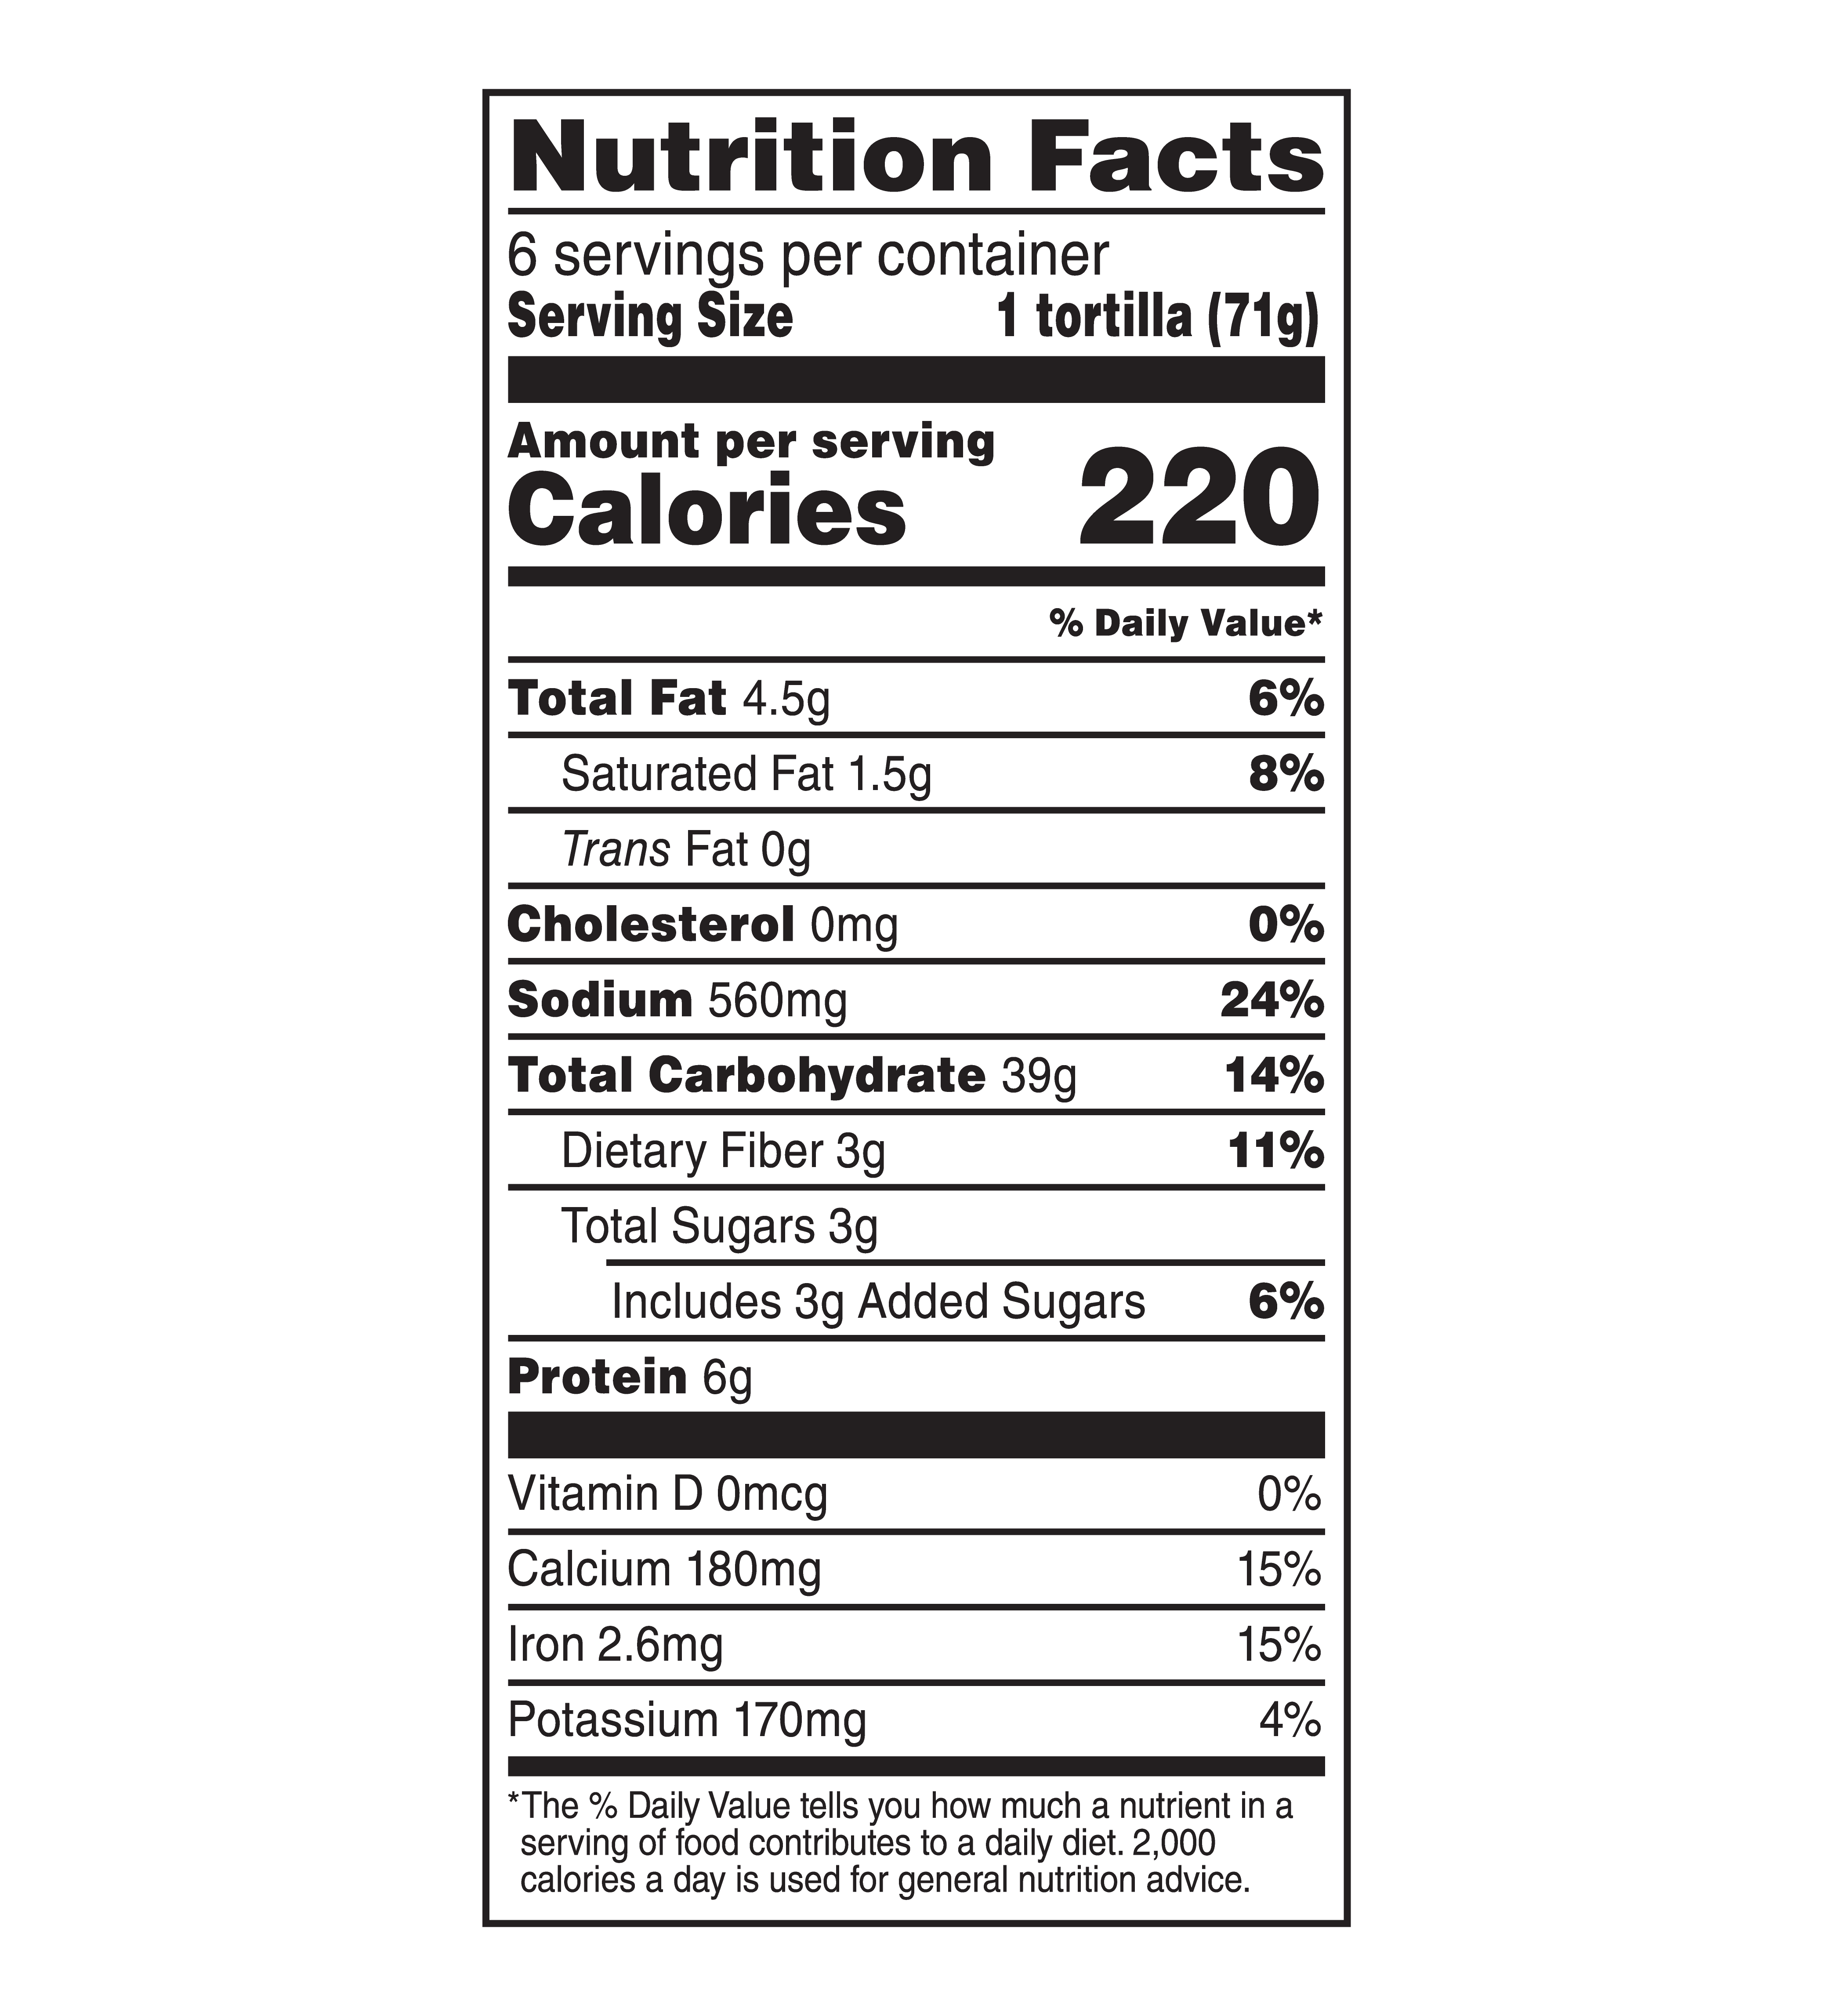 Sun Dried Tomato Basil Wraps nutrition facts